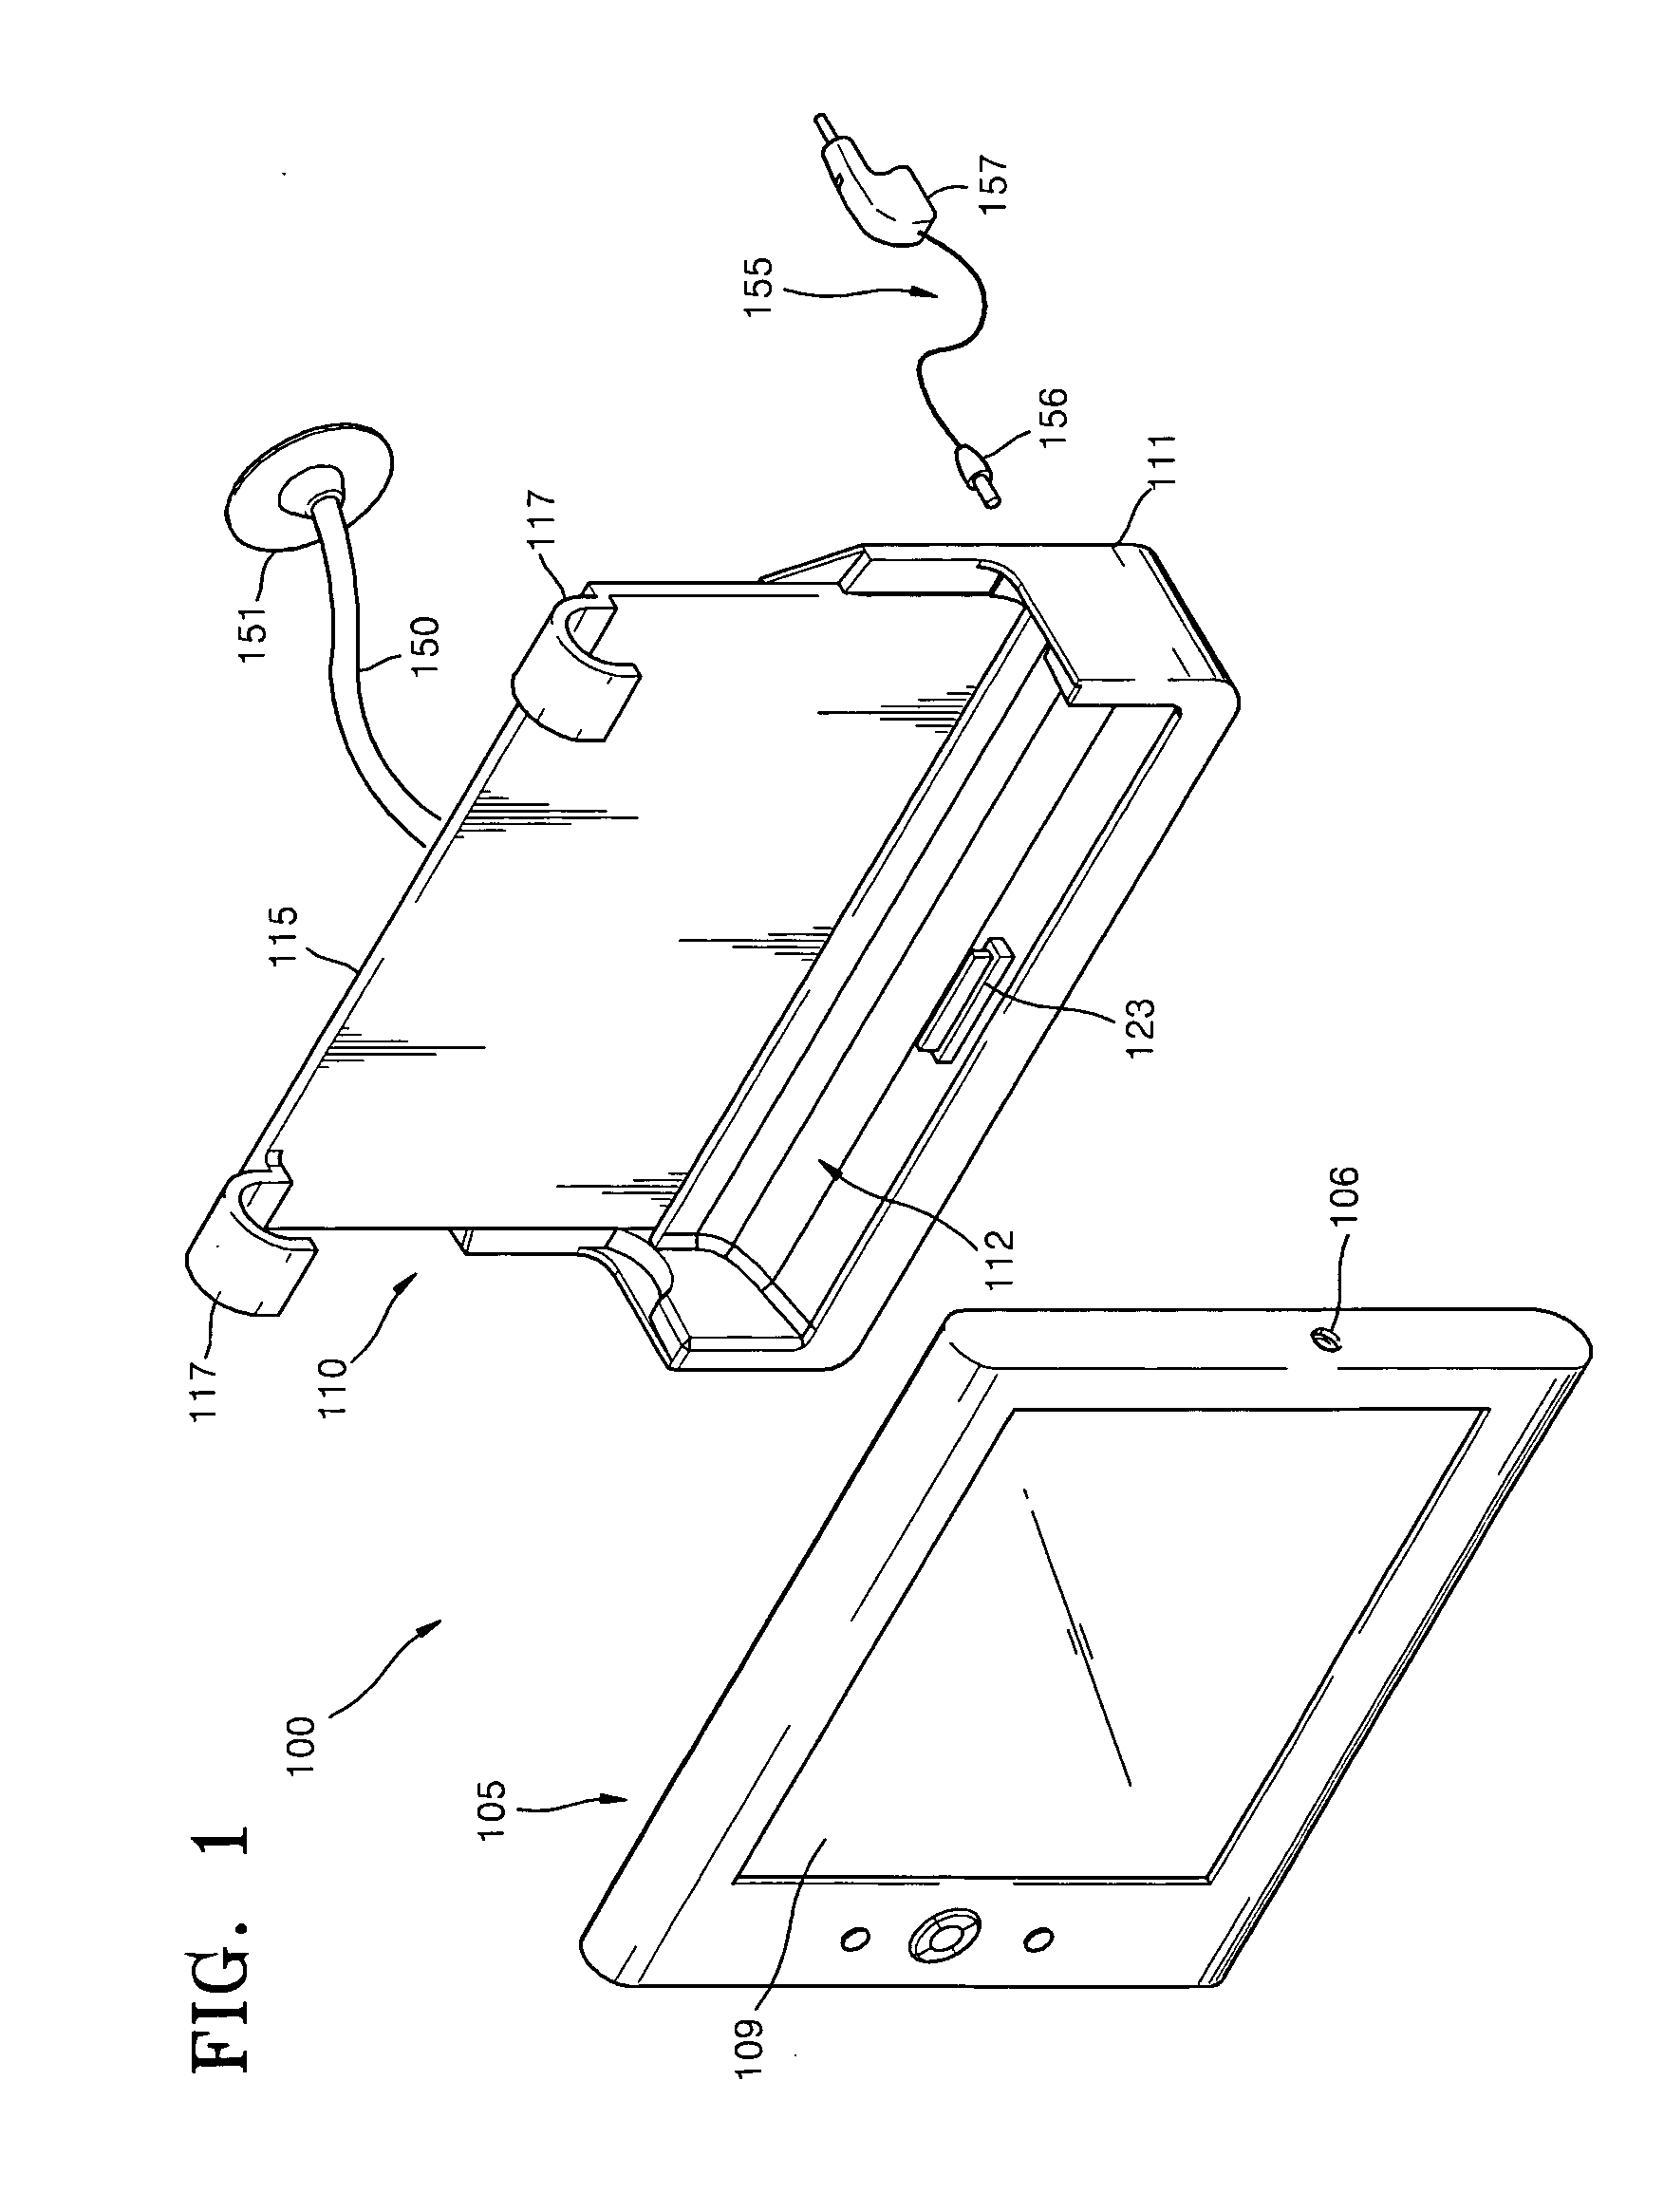 Cradle for use with a portable electronic appliance and a portable electronic appliance set including the cradle